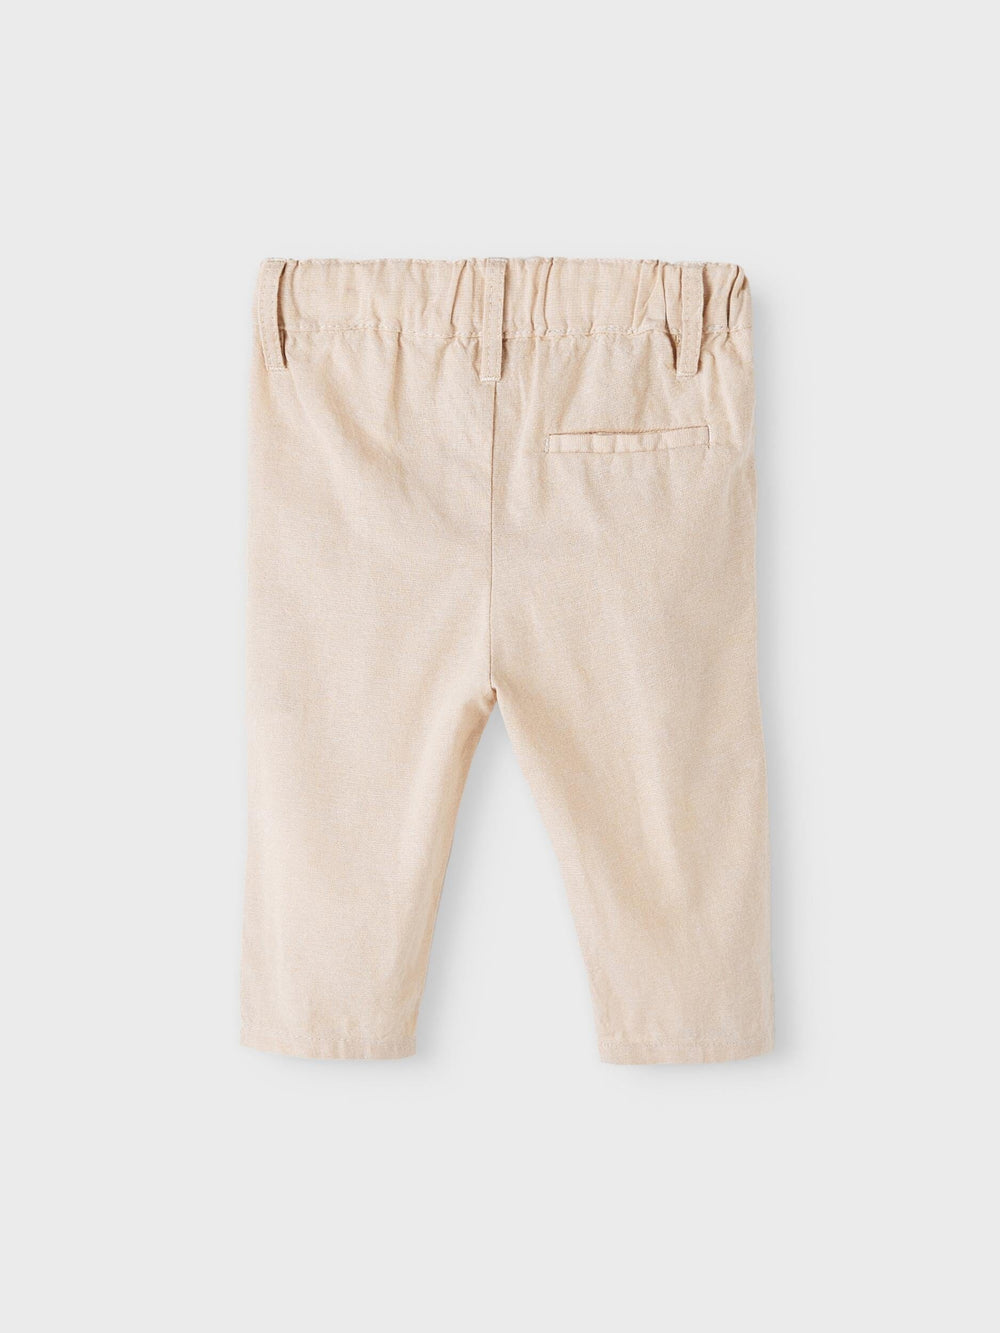 Lil' Atelier BABY HABBA PANT - Croissant Baby Lil' Atelier 